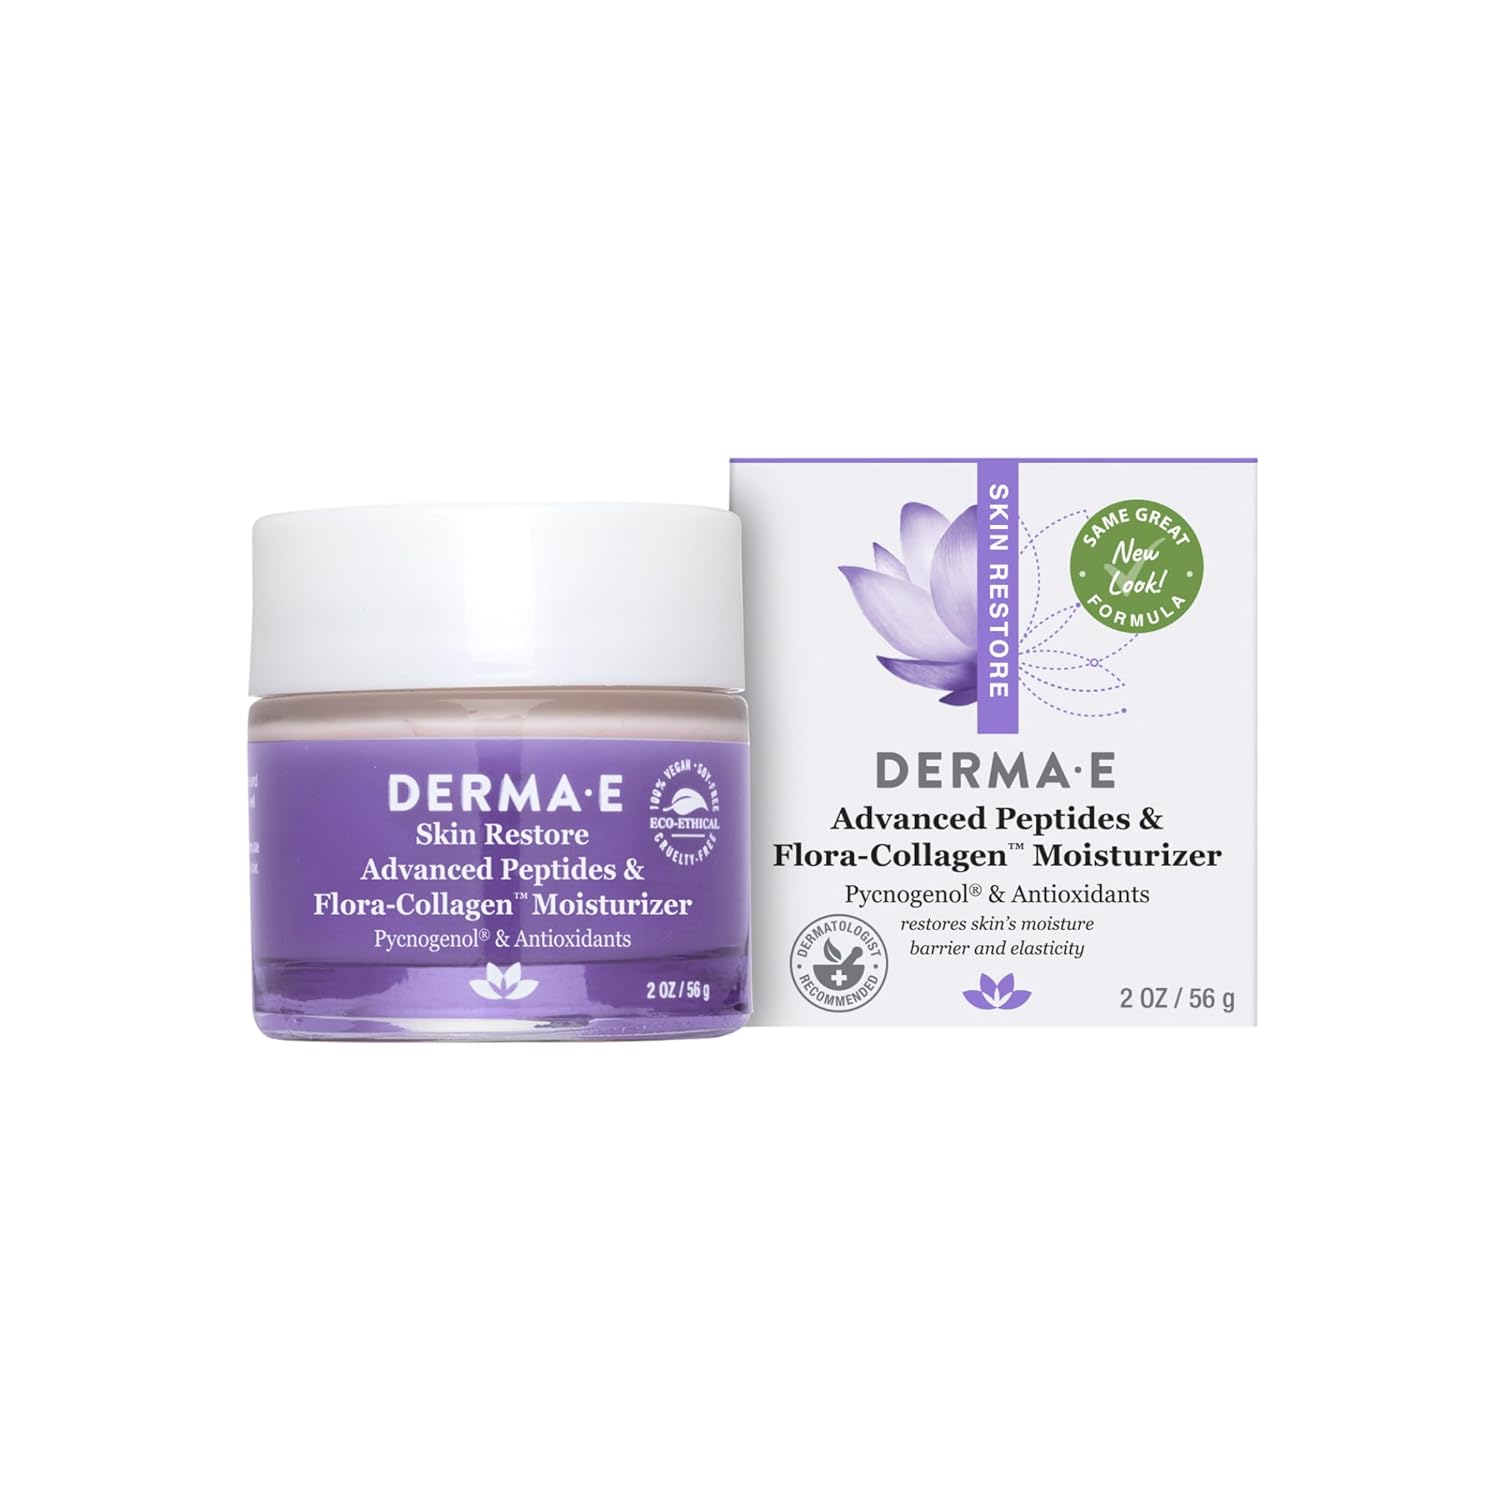 DERMA-E Advanced Peptides and Vegan Flora-Collagen Moisturizer – Double Action Collagen Face Cream with Peptide Complex – Intensely Hydrating Face Moisturizer for Lines, Wrinkles and Redness, 2 Oz